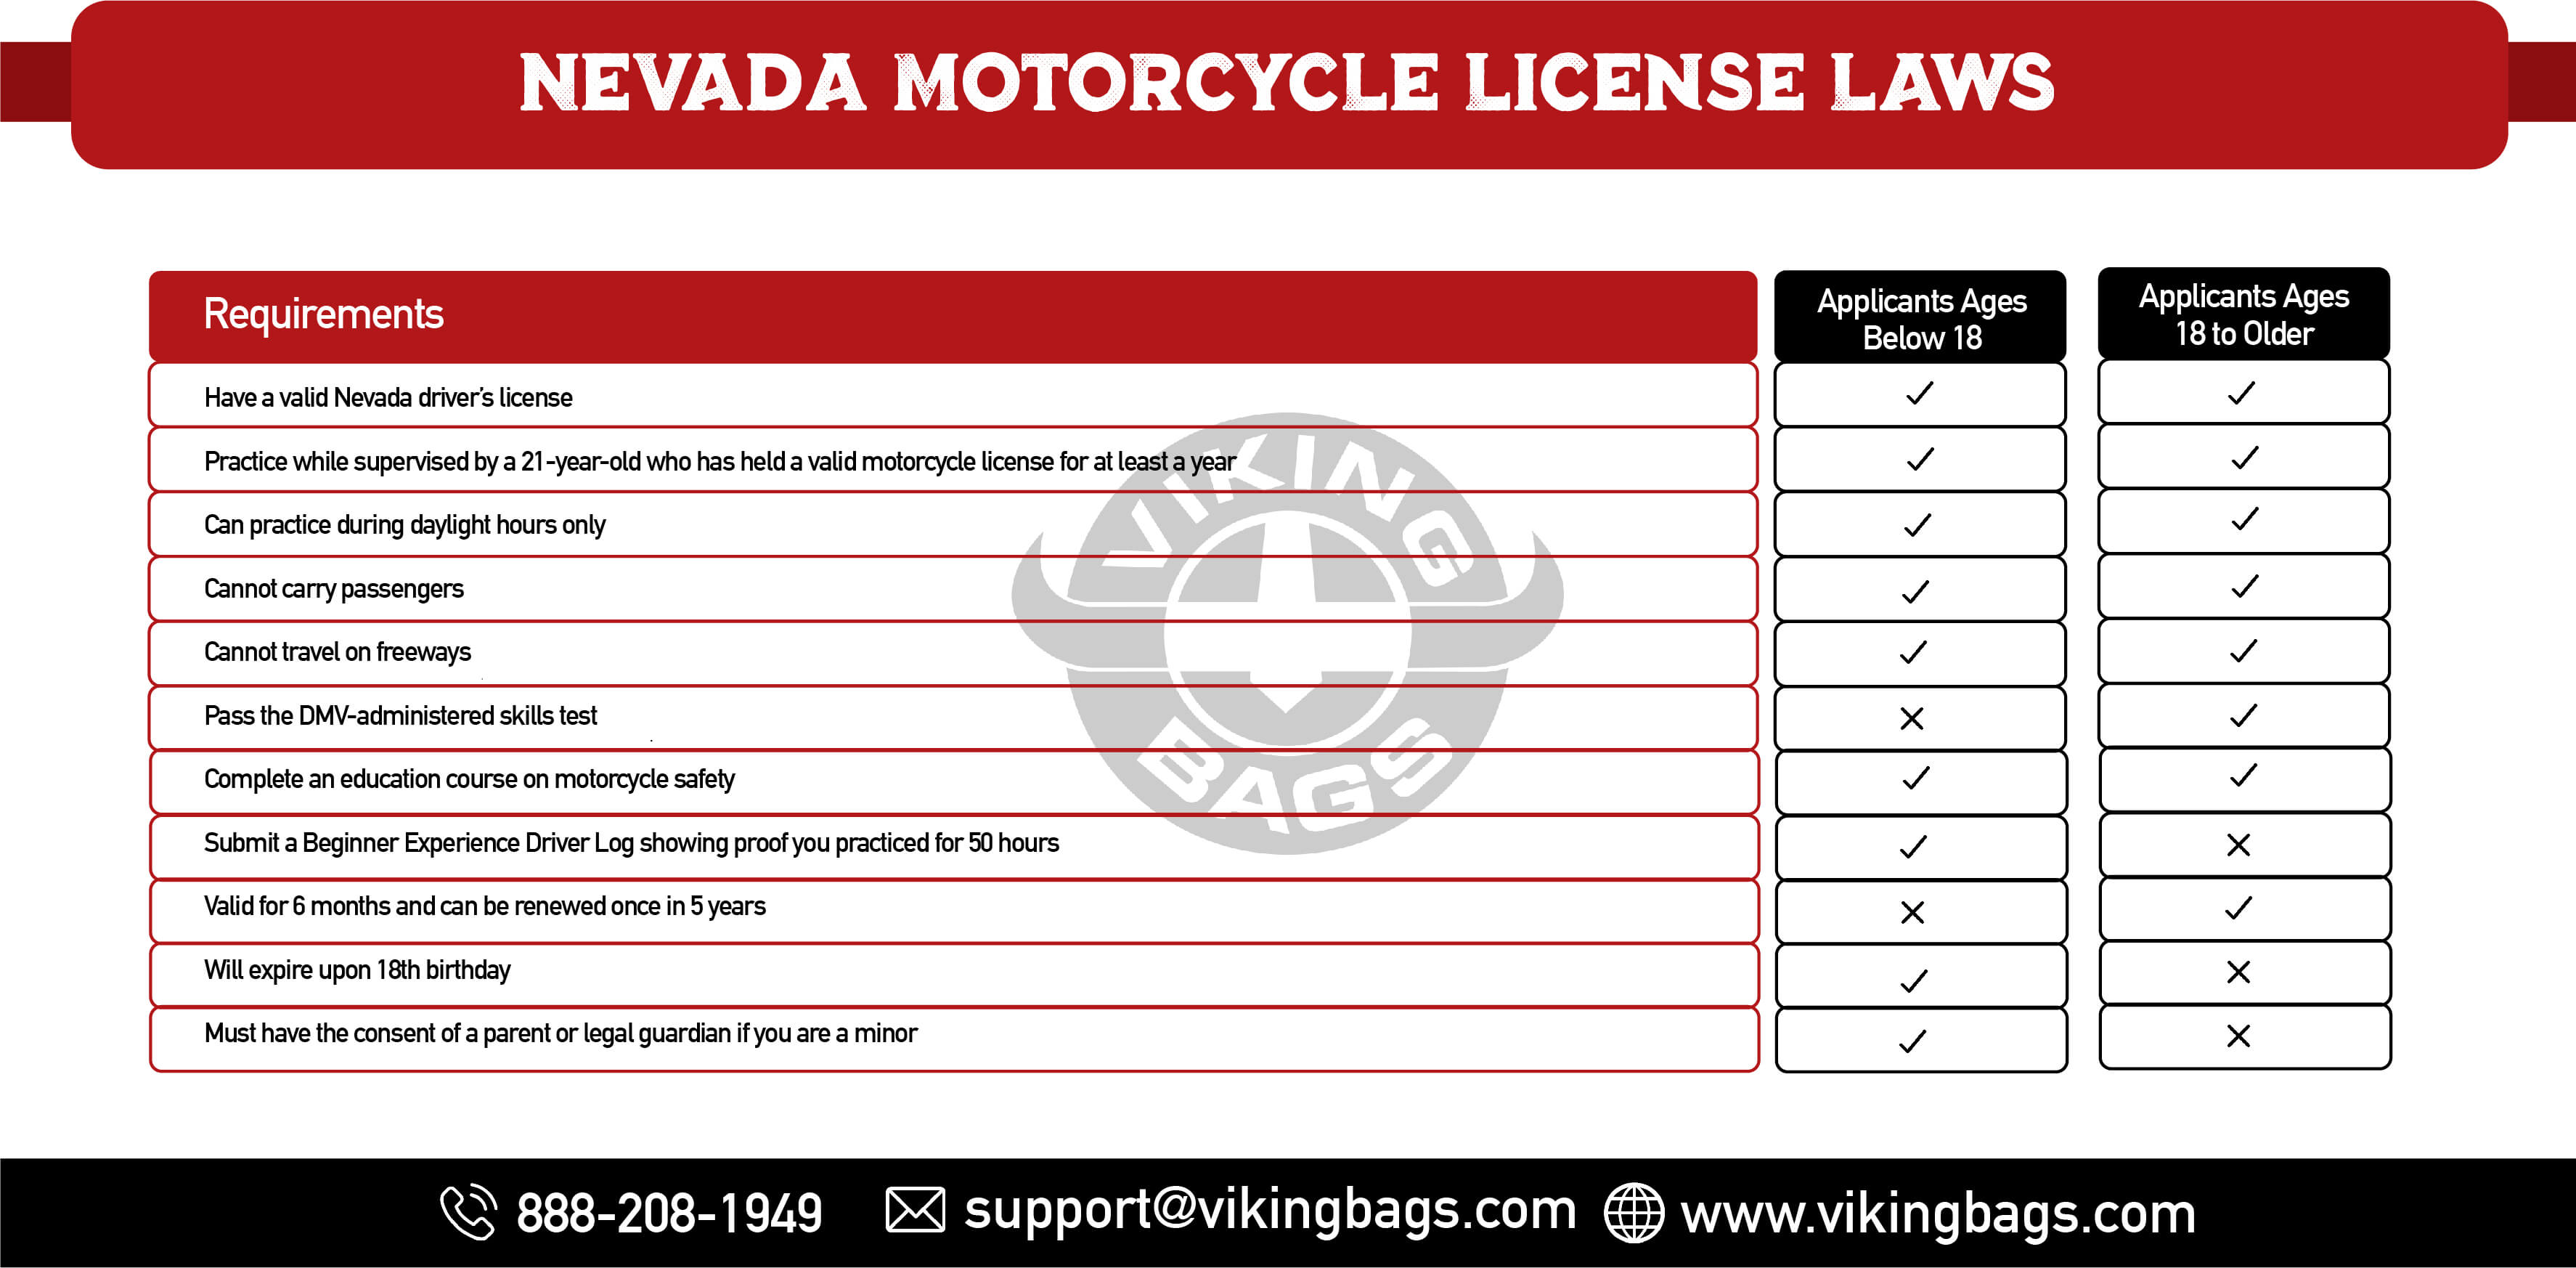 Nevada Motorcycle License Laws